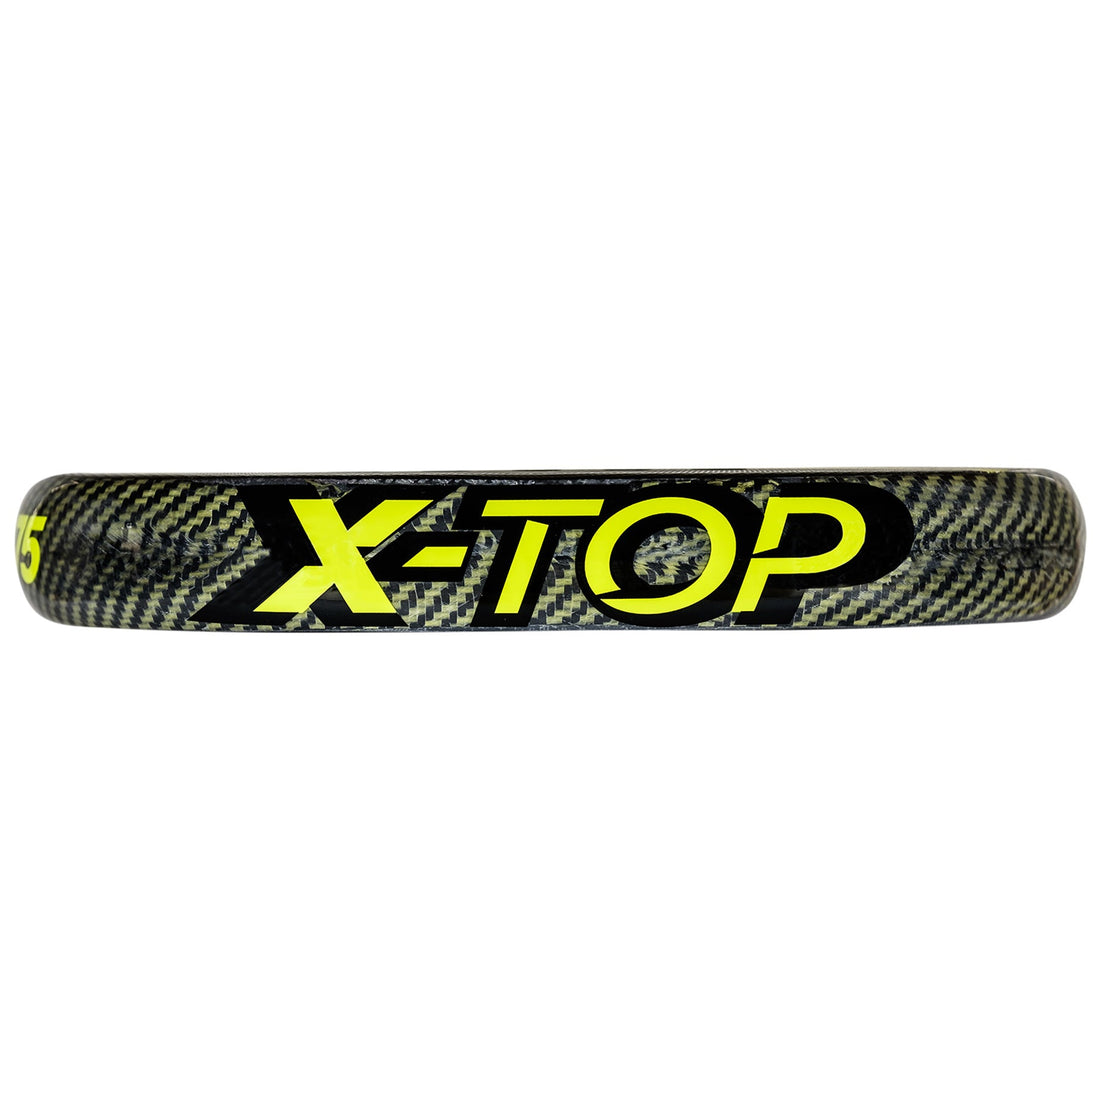 Tecnifibre Wall Breaker X-Top 375 with Cutting-edge X-TOP Technology